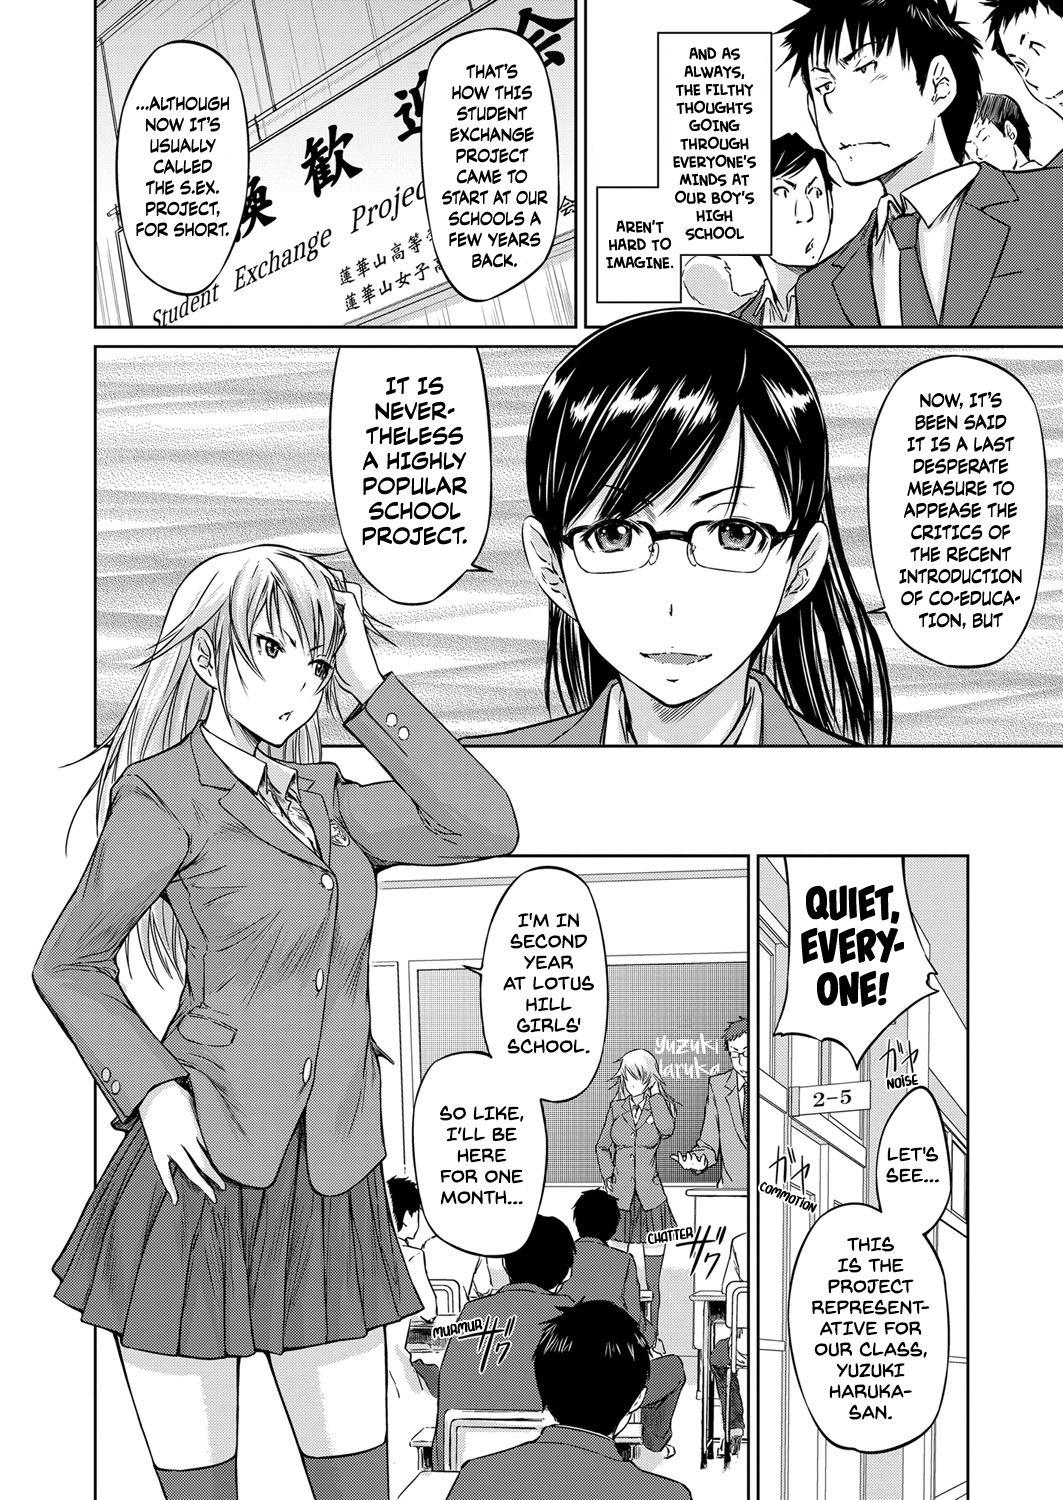 Slave Seitou Koukan no Susume | Student Exchange Recommendation Hand - Page 2